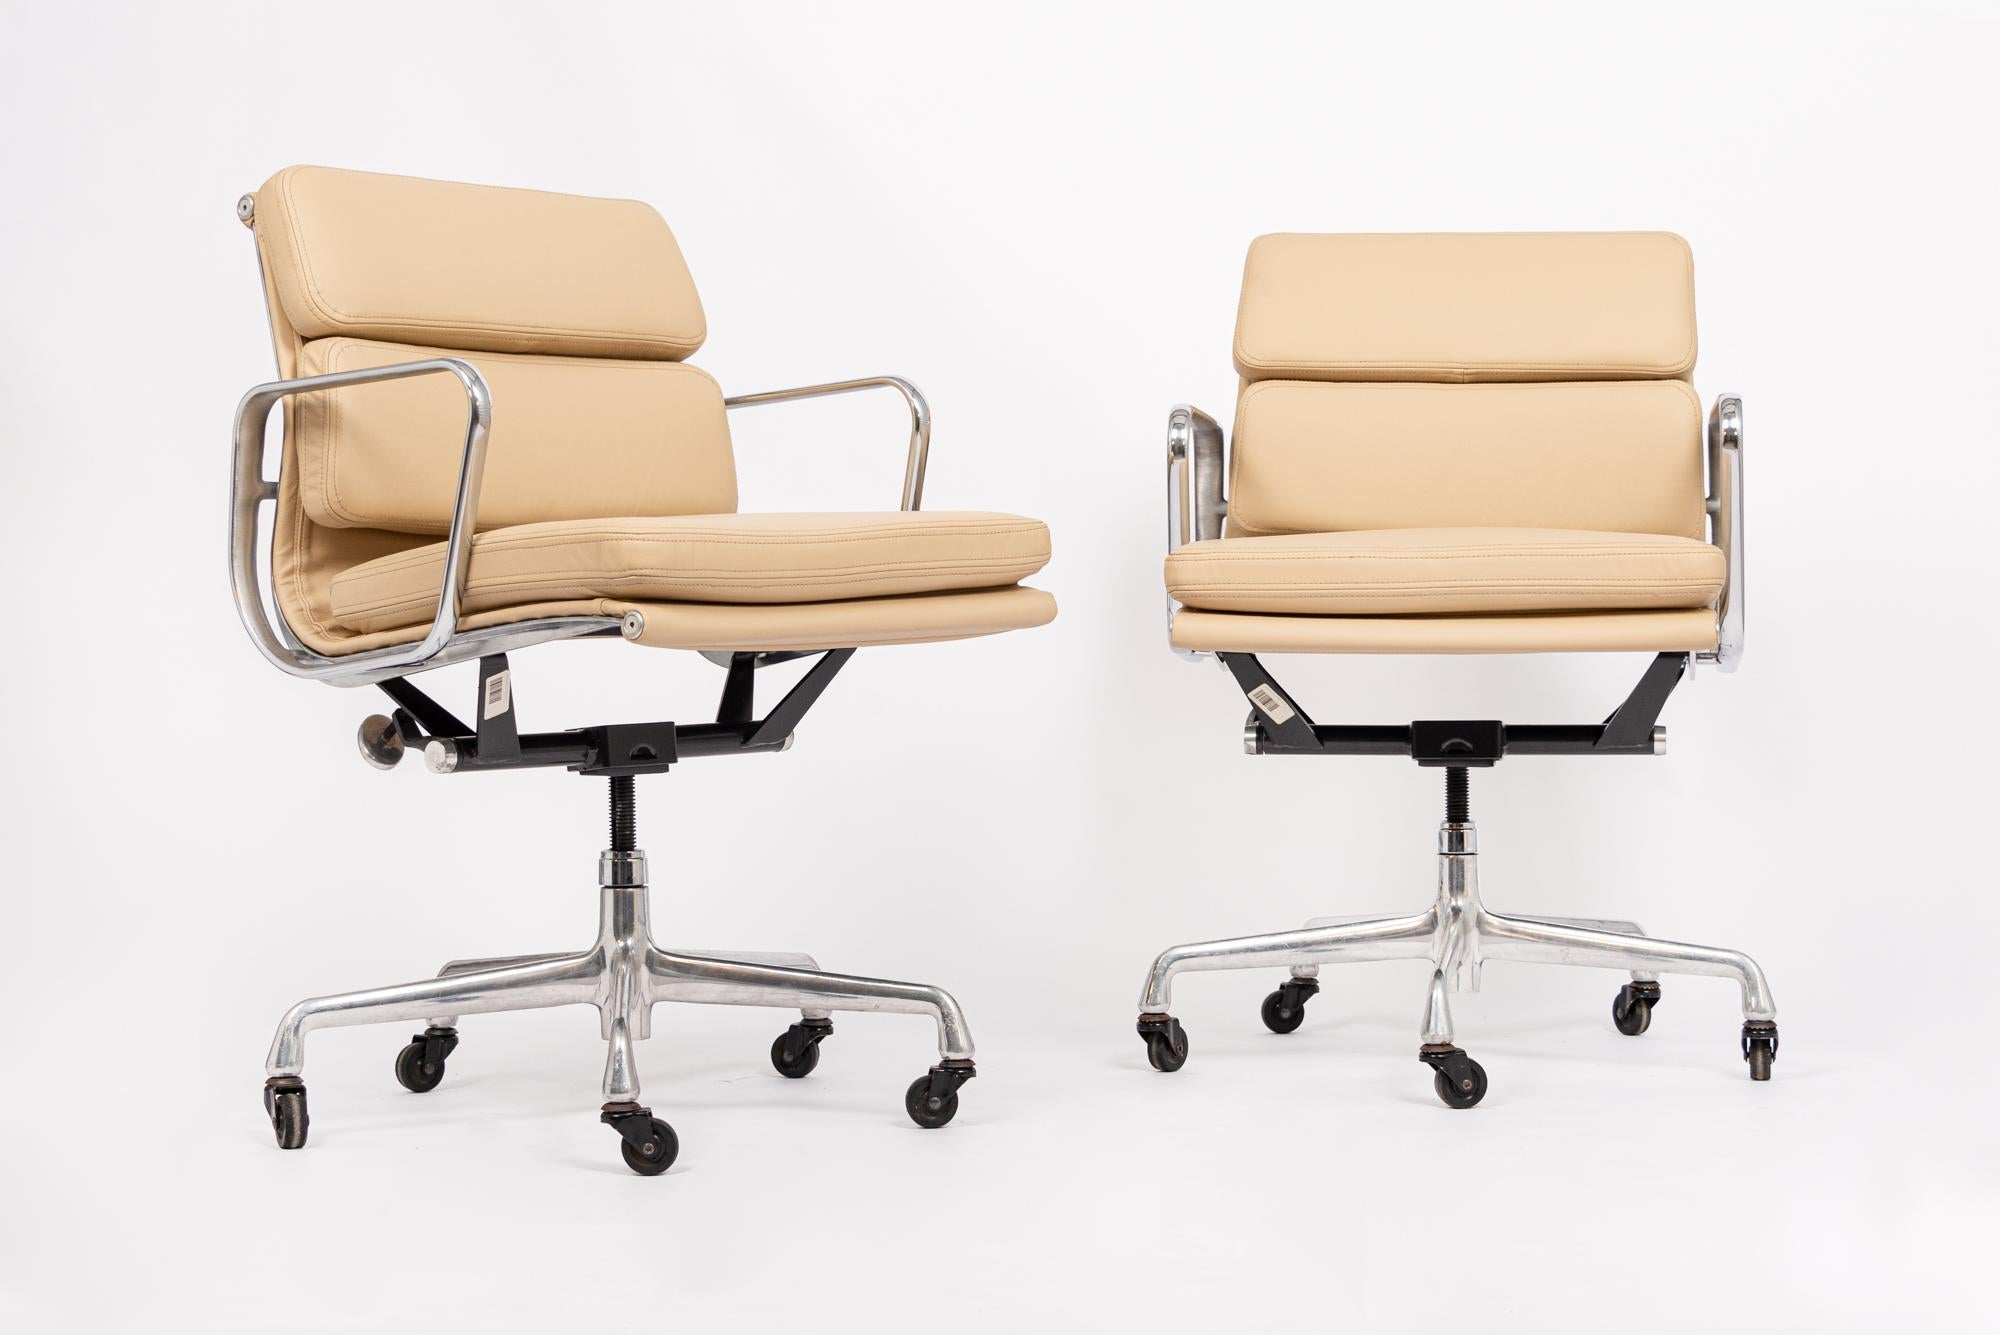 This pair of authentic Eames for Herman Miller Soft Pad Management Height cream leather office chairs from the Aluminum Group Collection were manufactured in the 2000s. This classic mid century modern office chair was first introduced in 1969 by